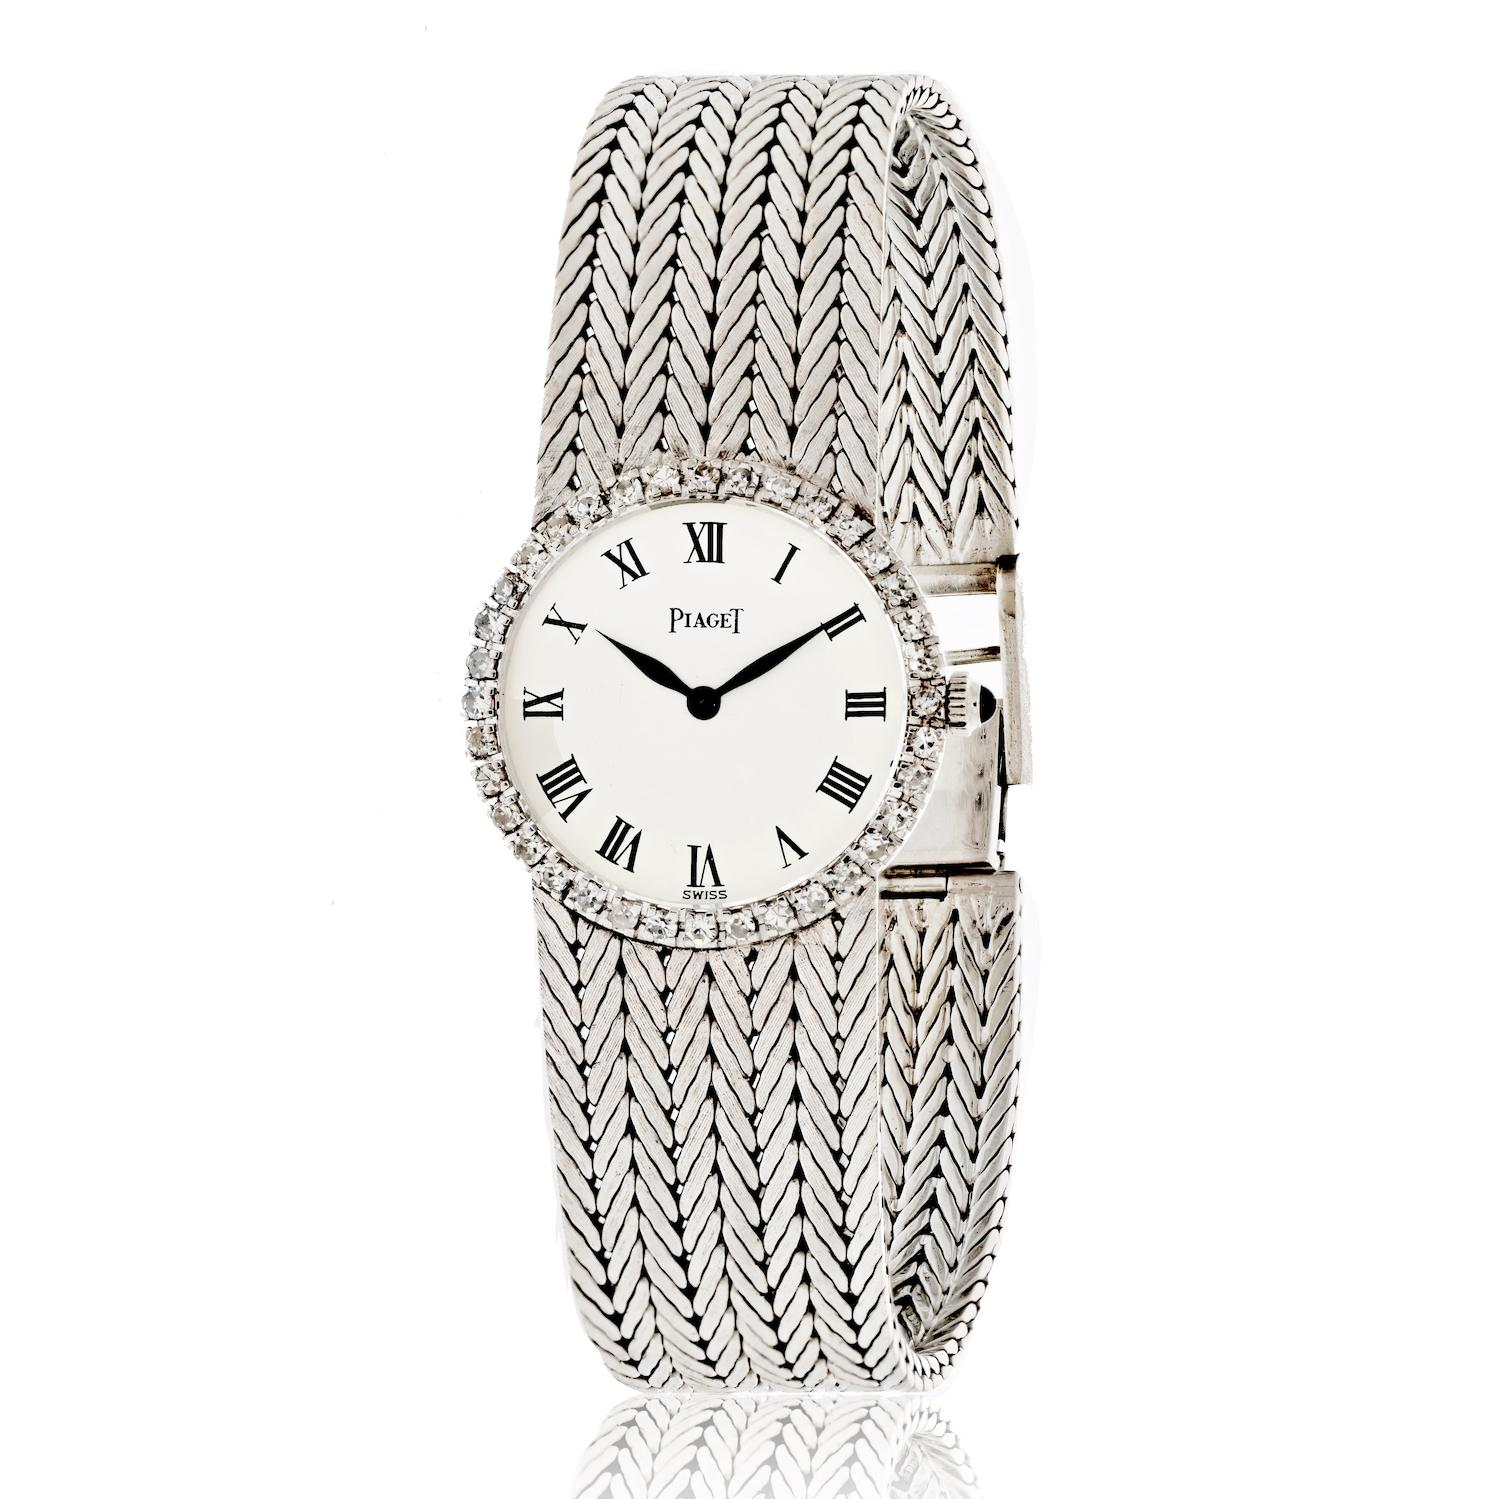 Ladies Piaget Watch with Roman Numeral White Dial and Diamond Bezel.

A ladies 18K white gold Piaget wristwatch featuring a white enamel dial with Roman numerals. Surrounding the dial is a bezel set with 36 round brilliant cut diamonds weighing a